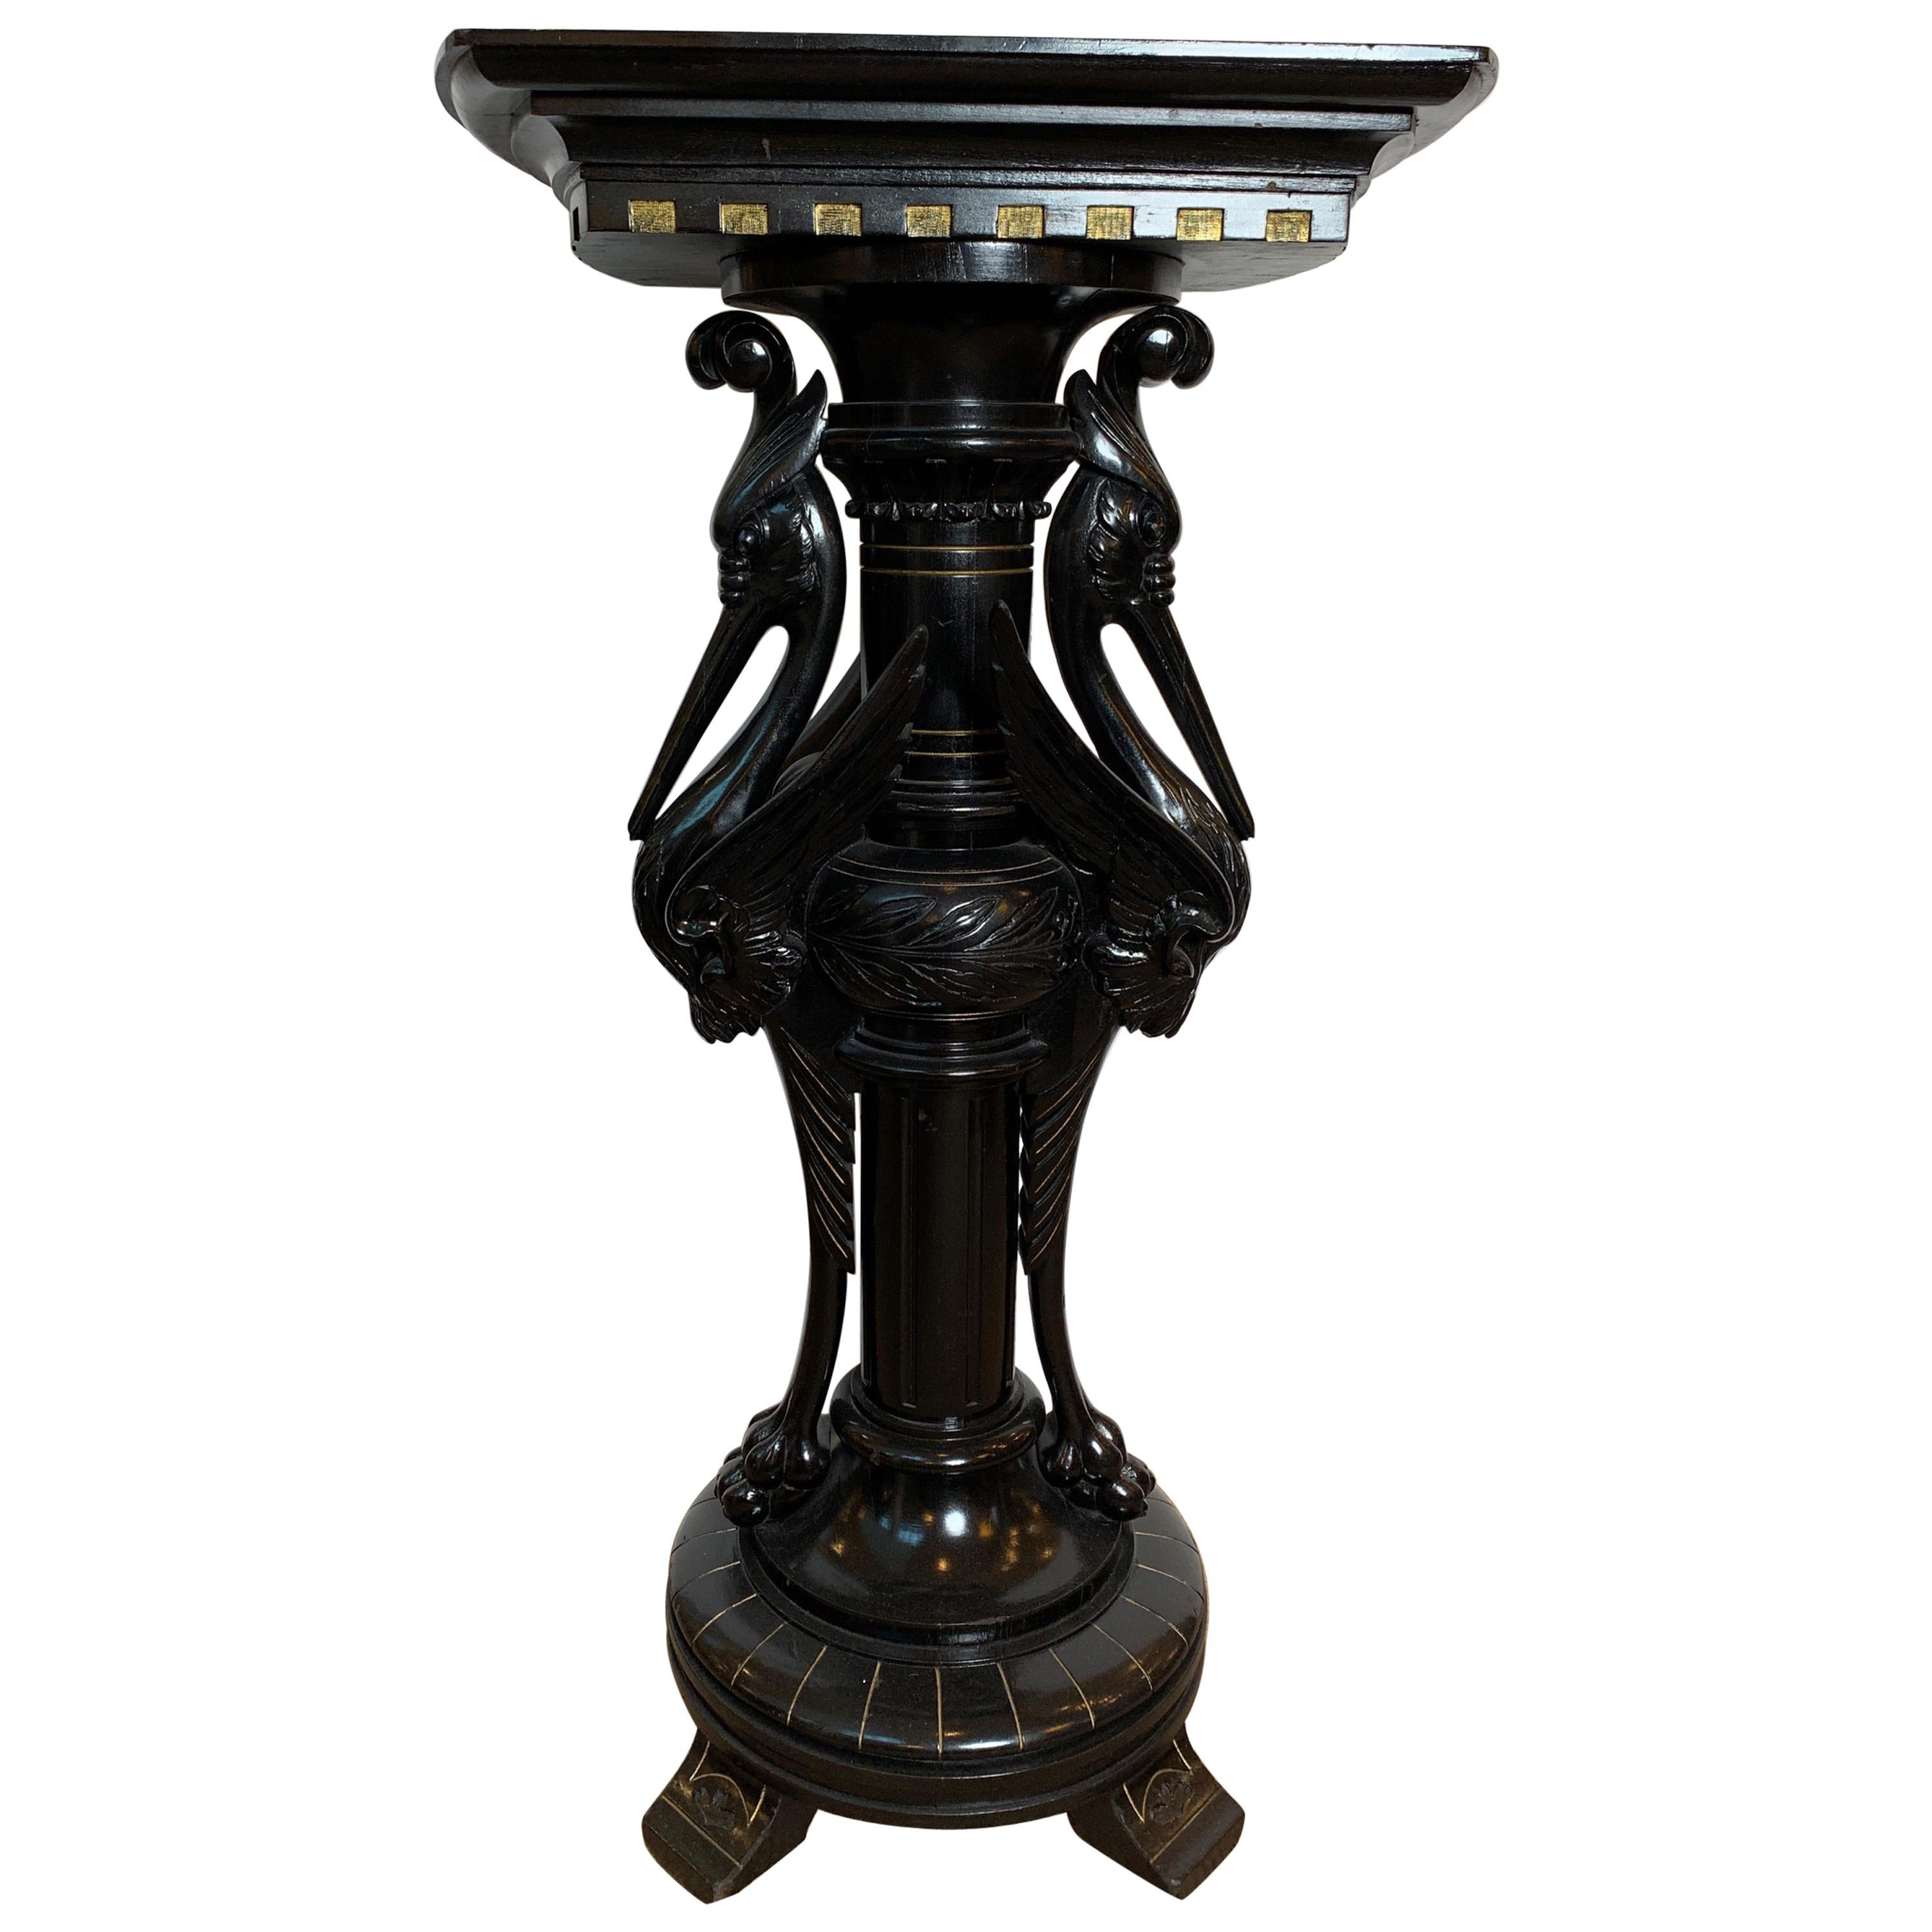 Aesthetic Period Ebonized Pedestal in the Form of Two Cranes